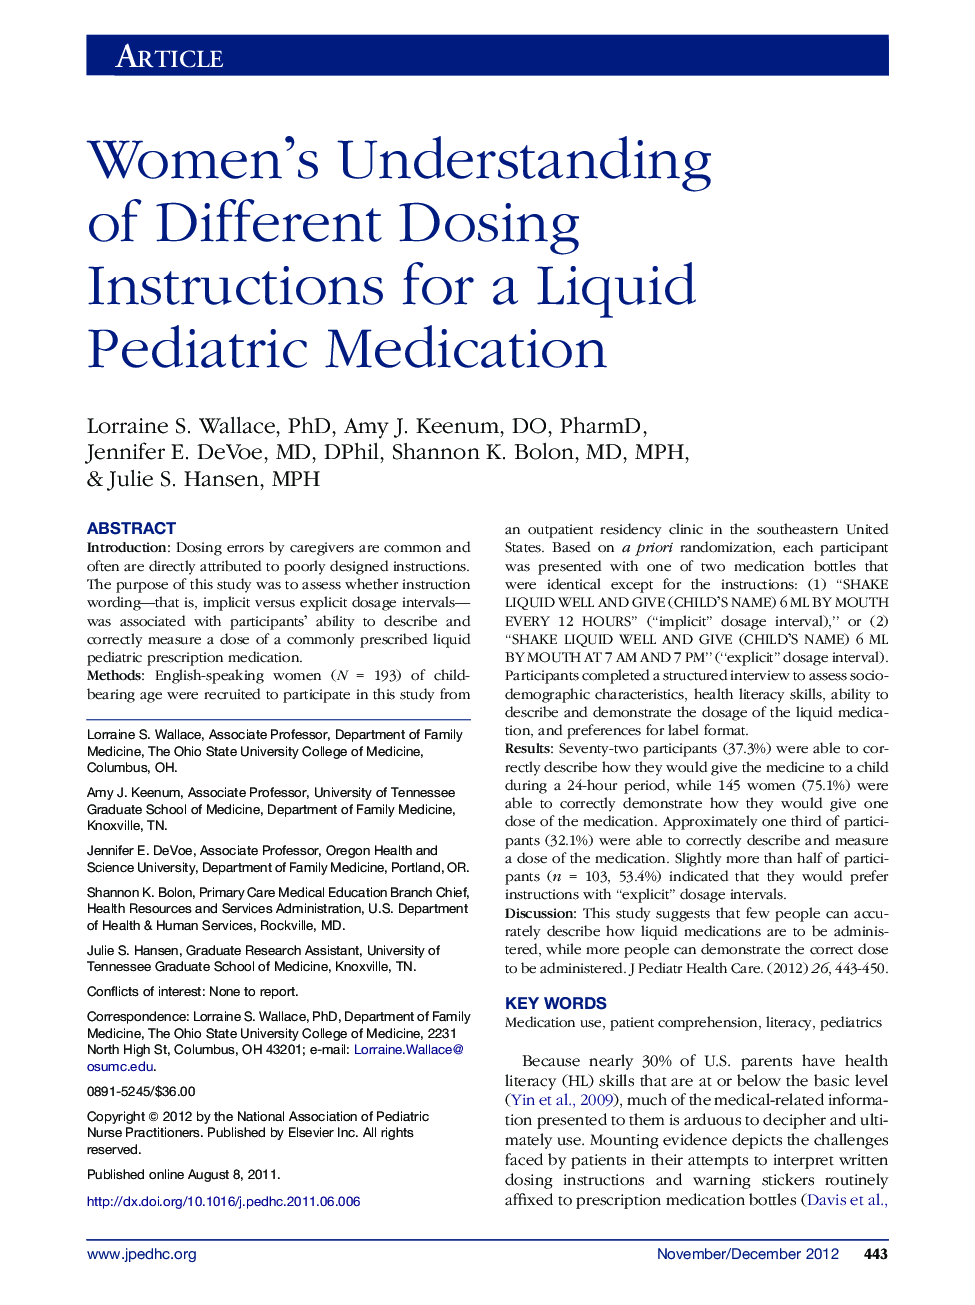 Women’s Understanding of Different Dosing Instructions for a Liquid Pediatric Medication 